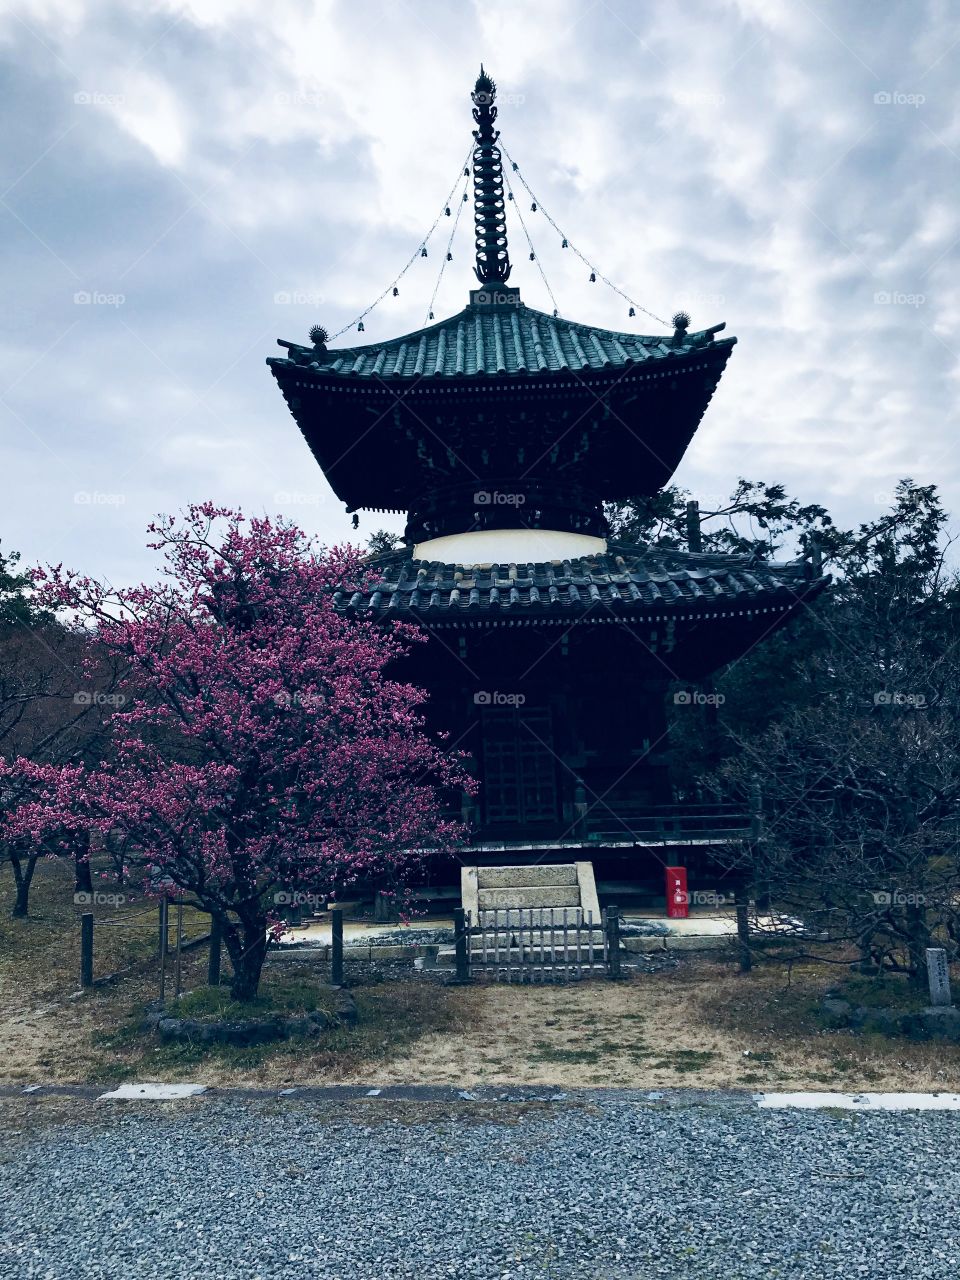 Seiryo-ji temple is a Jodo temple in Japan, Kyoto known as the Saga-no-shaka-do. Seiryo-ji was originally a mountain villa for Toru of Minamoto, who is said to have served as the model for the famous Tale of Genji’s main character, Genji. 